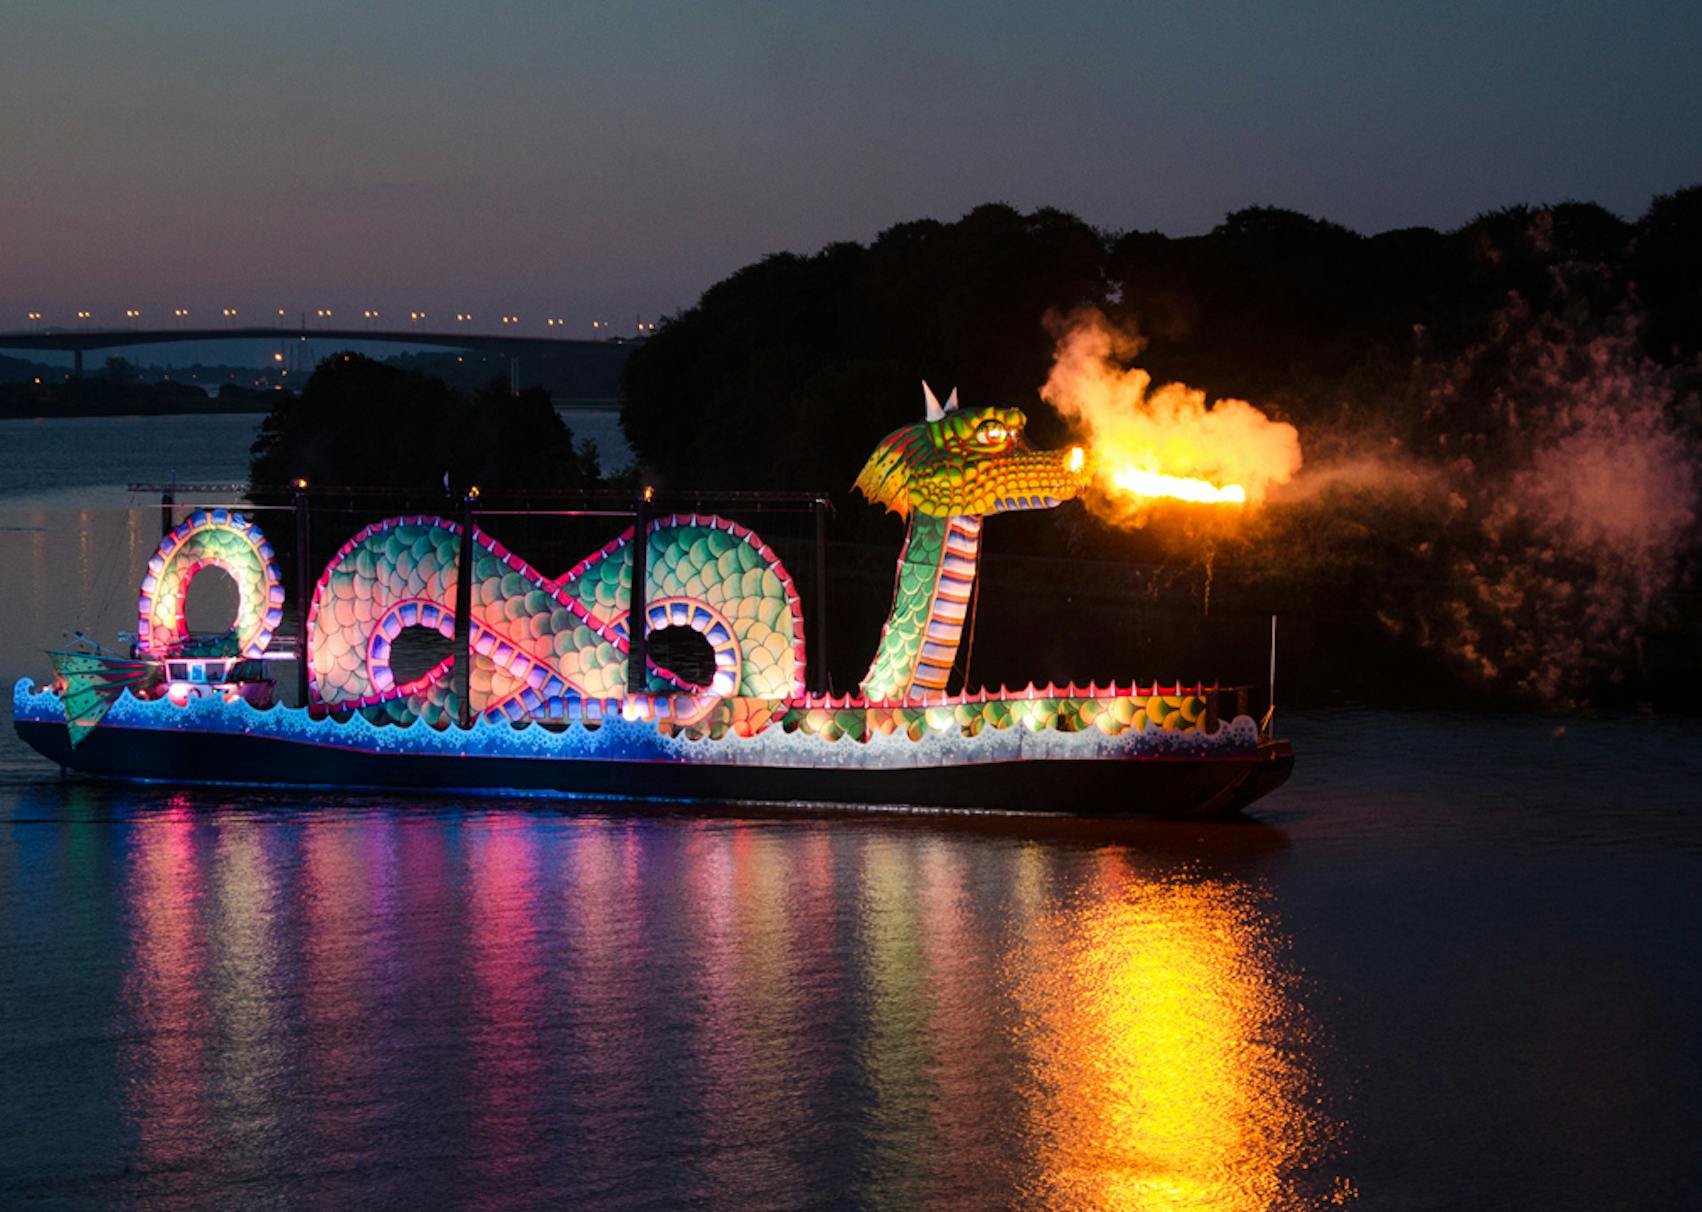 A large green dragon atop a boat breathing fire 